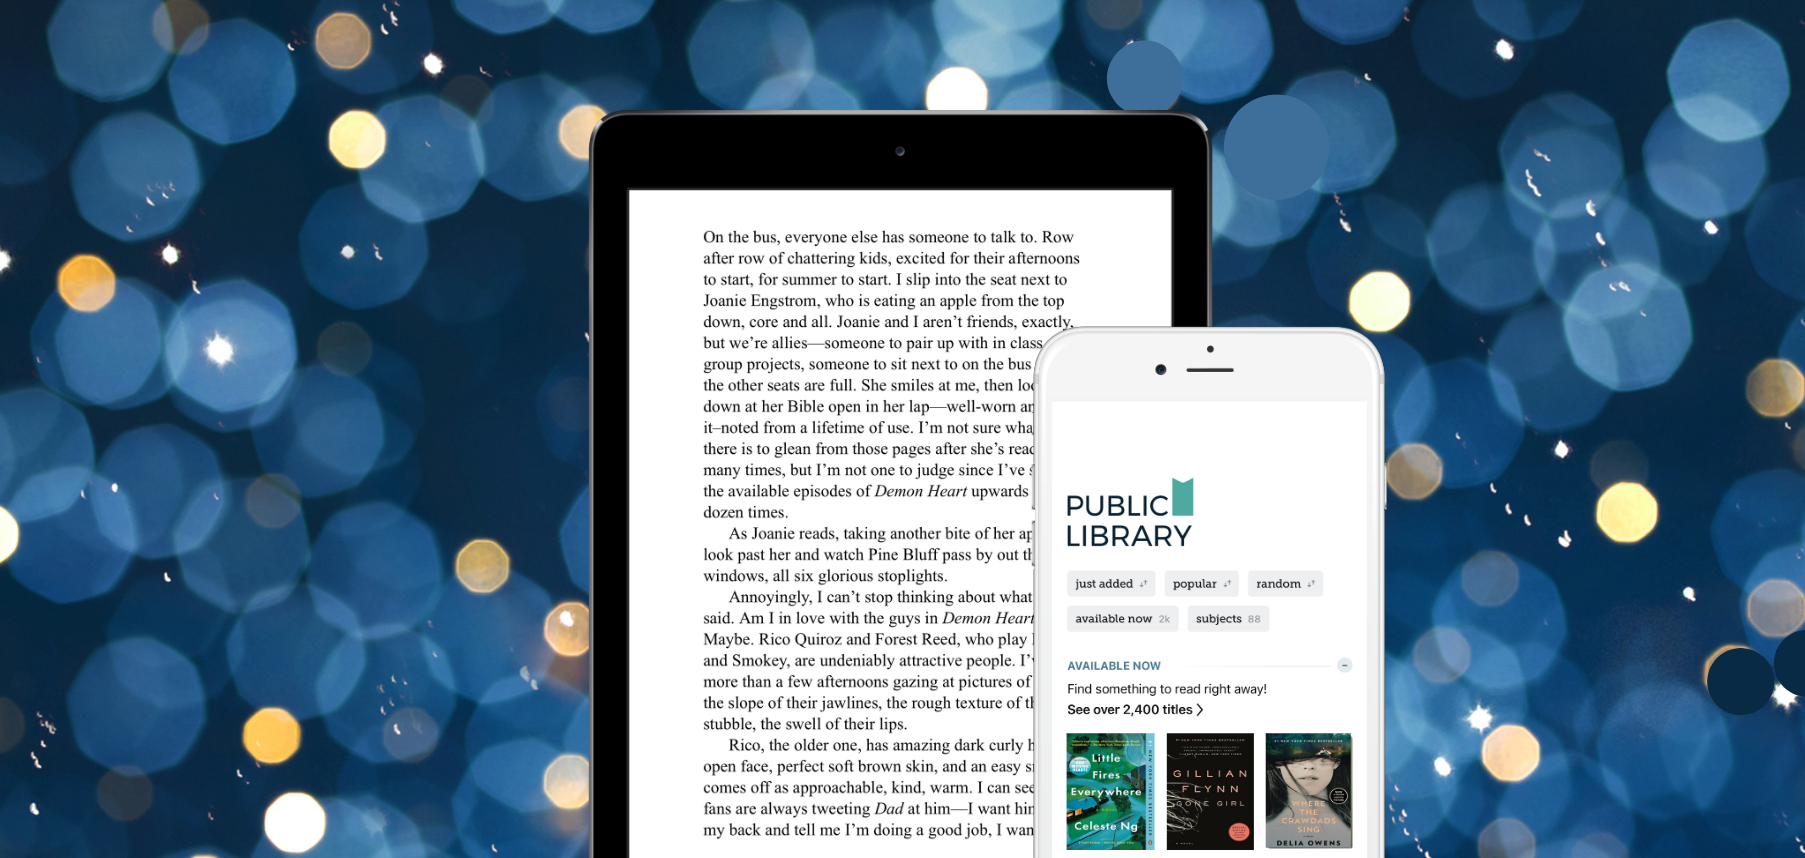 Image of text on an iPad and an iPhone with the Libby app interface. In the background, lights are displayed on a dark blue background.